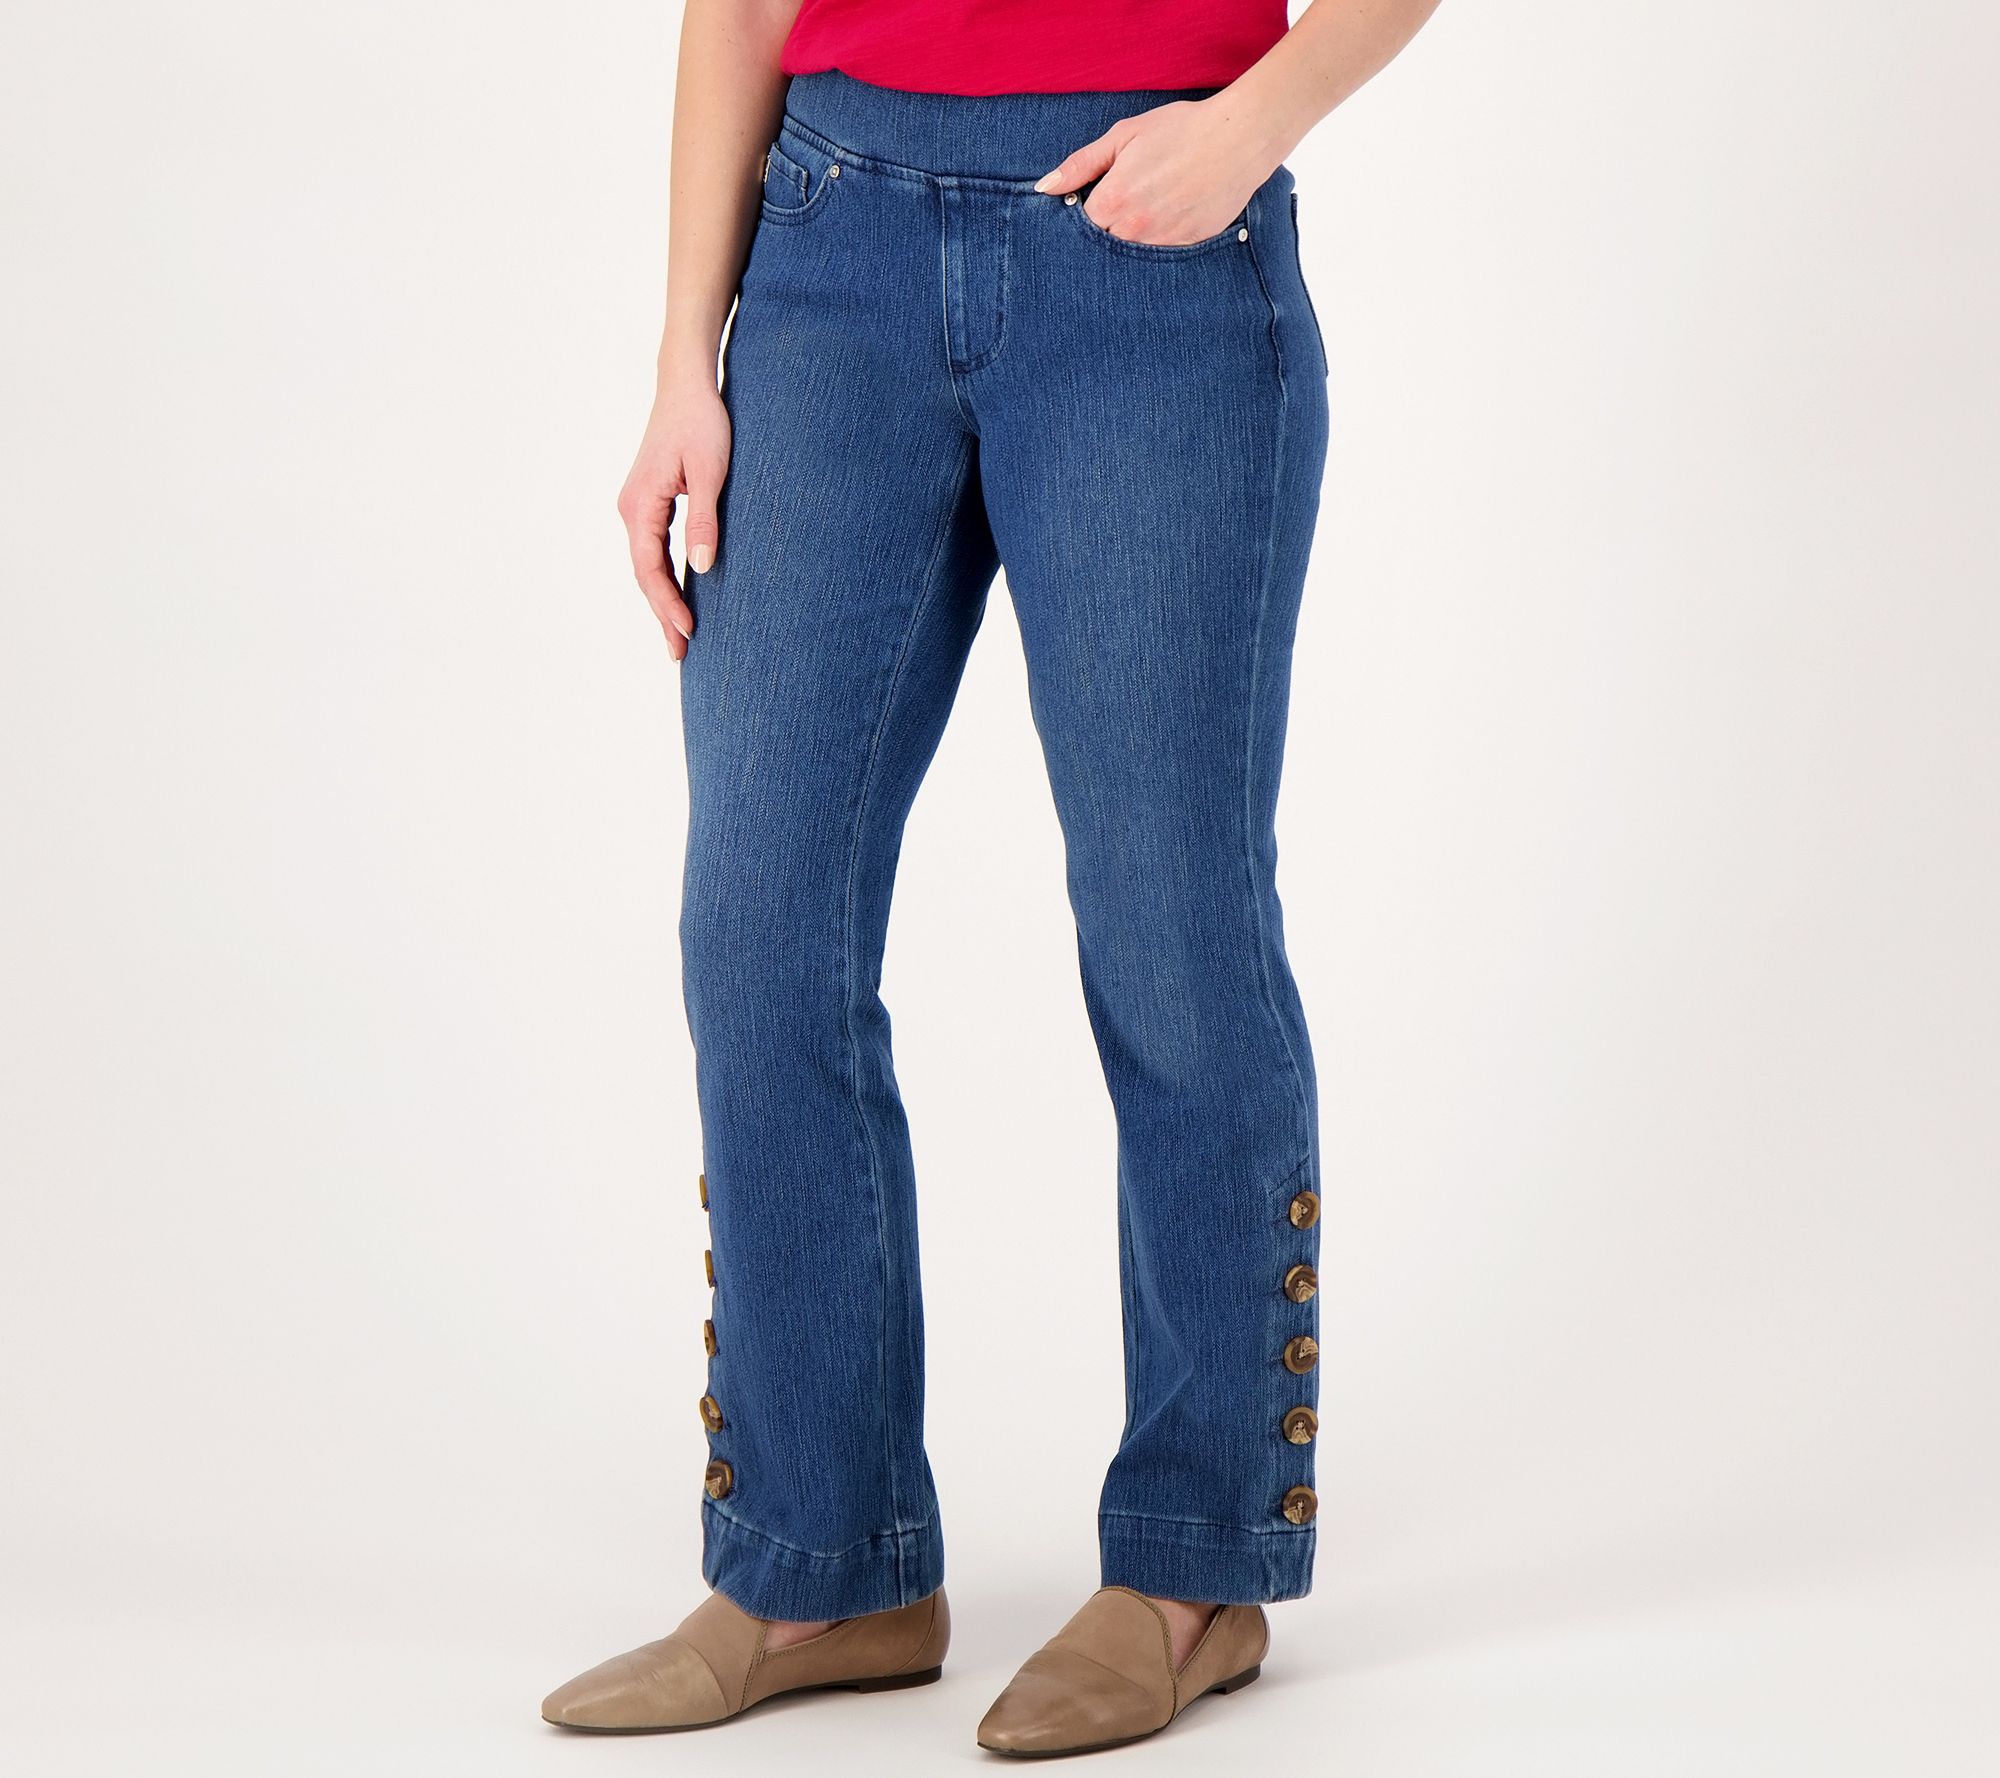 Belle by Kim Gravel Flexibelle Flare Jean with Horn Buttons - QVC.com